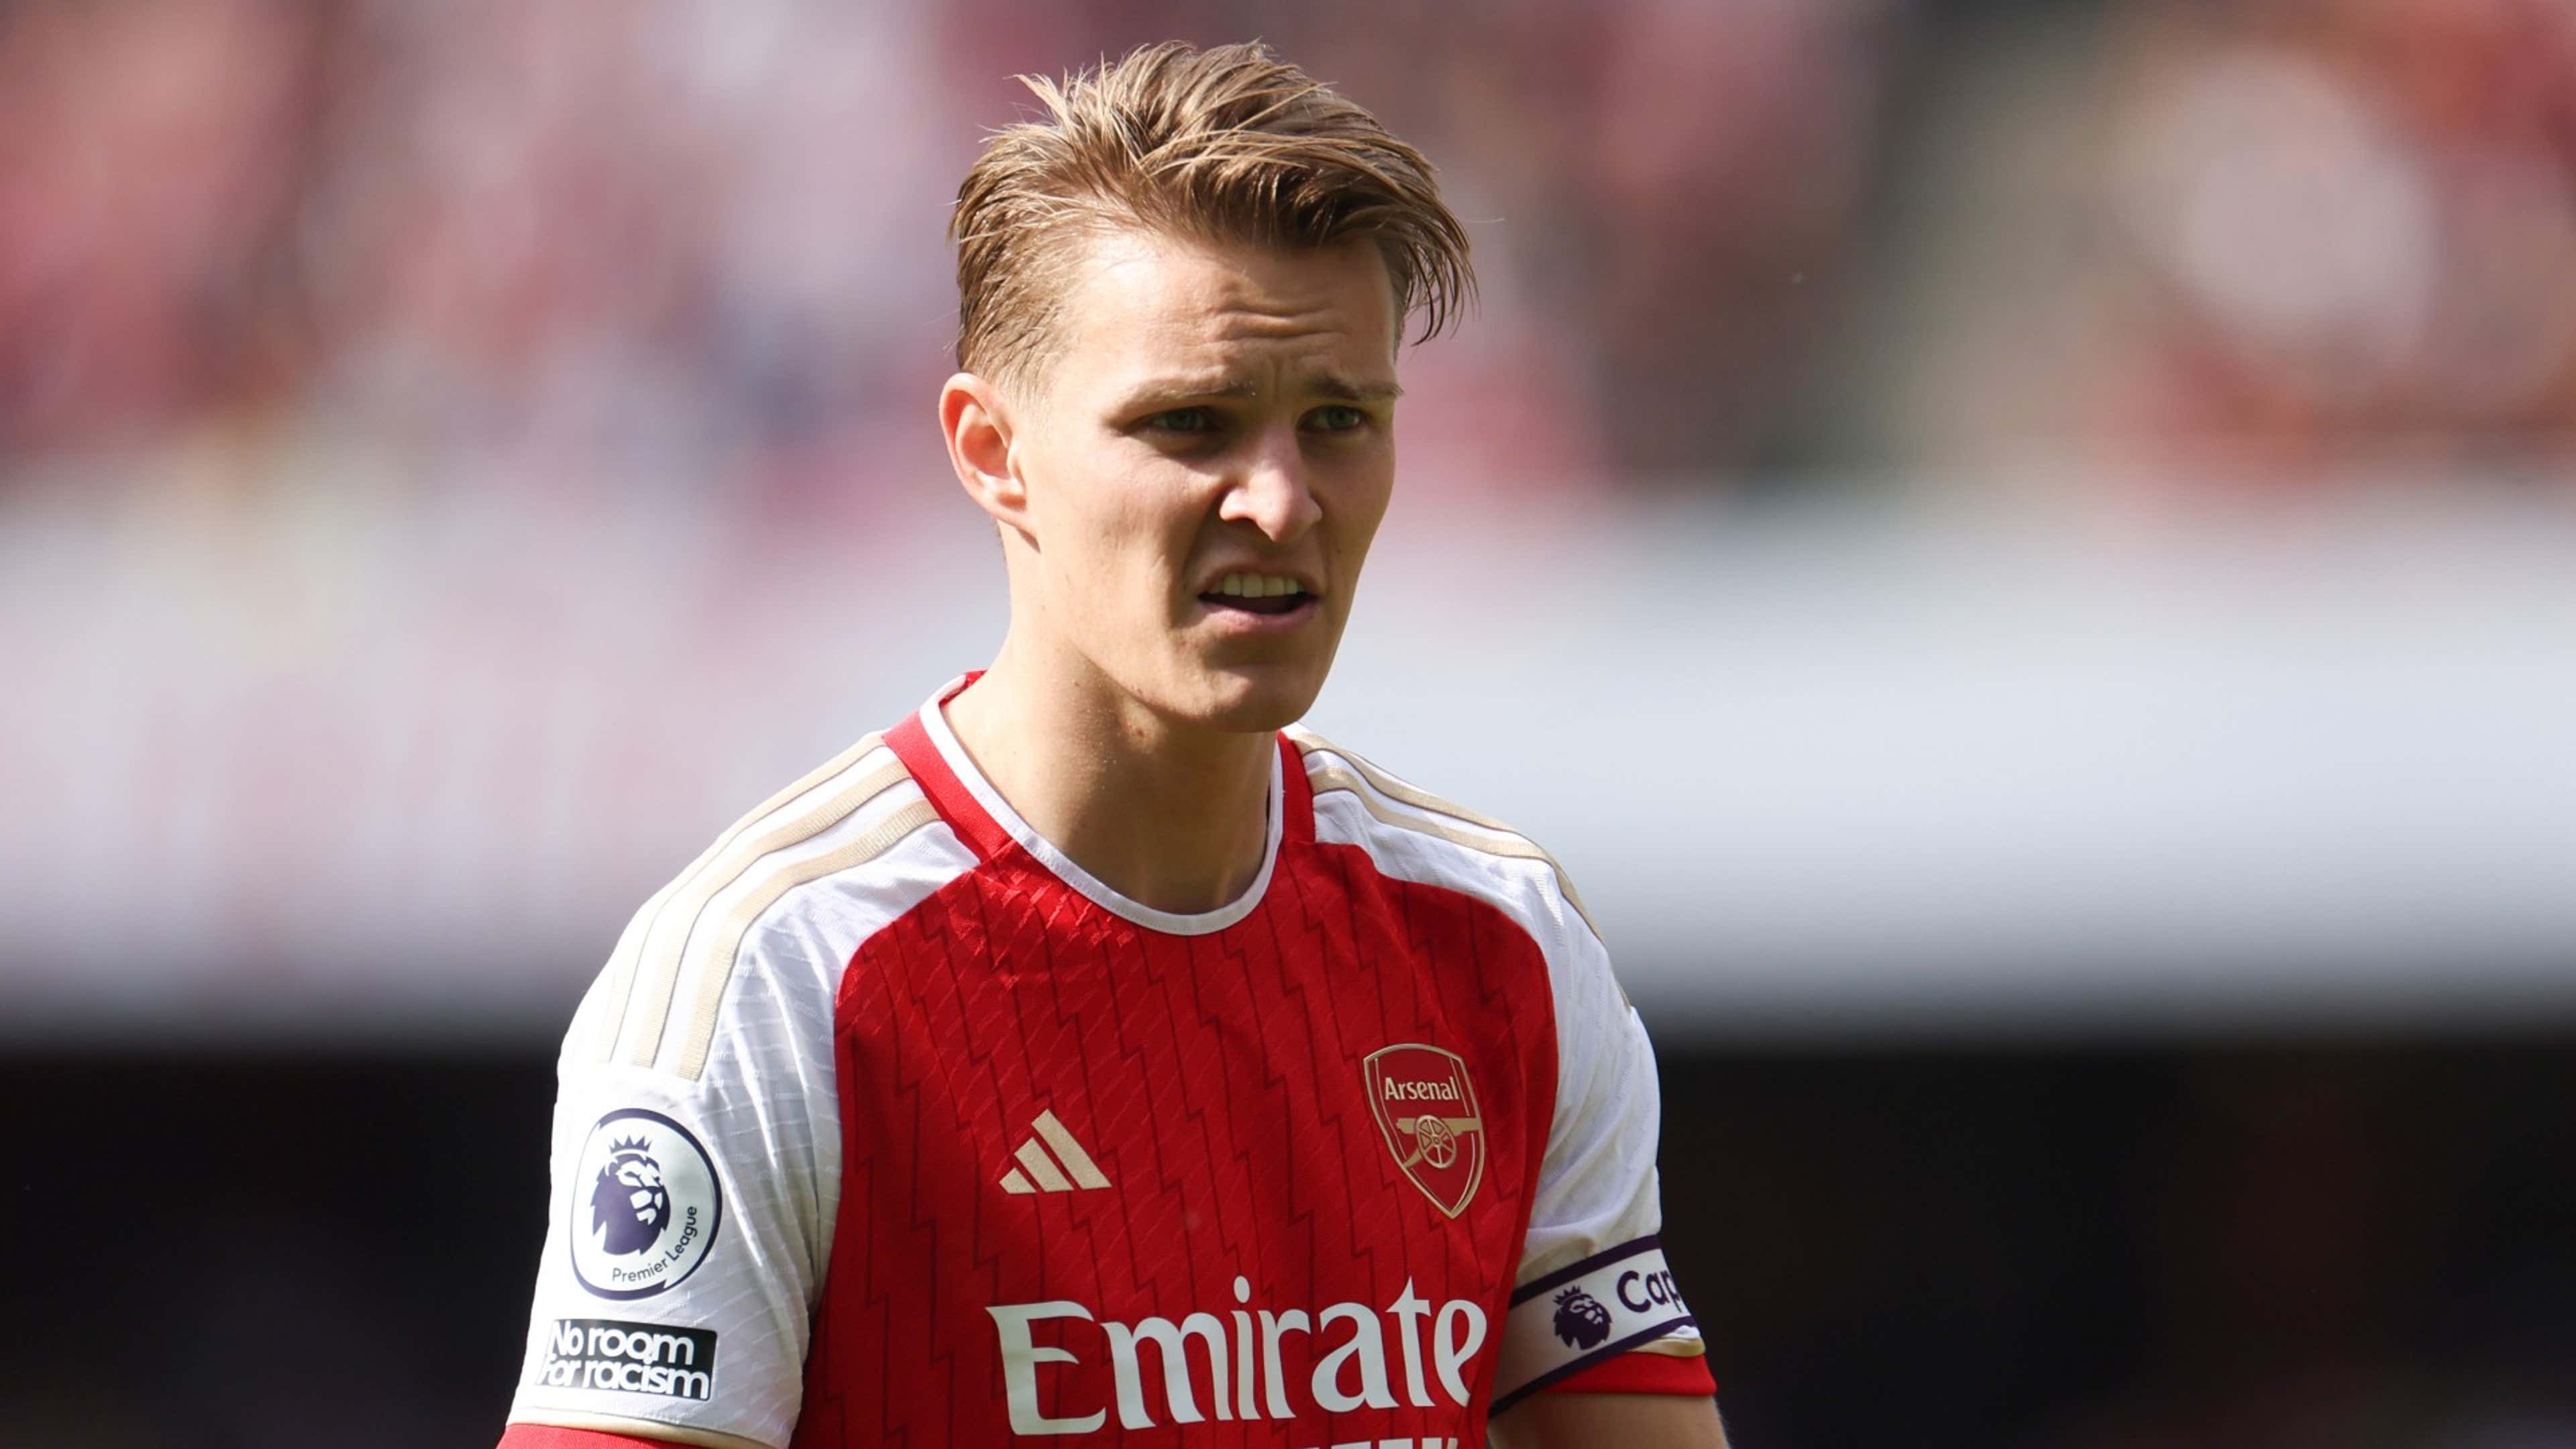  Martin Odegaard, a Norwegian professional footballer who plays as a midfielder for Premier League club Arsenal, is seen here in his team's kit with a pensive expression on his face during a match.